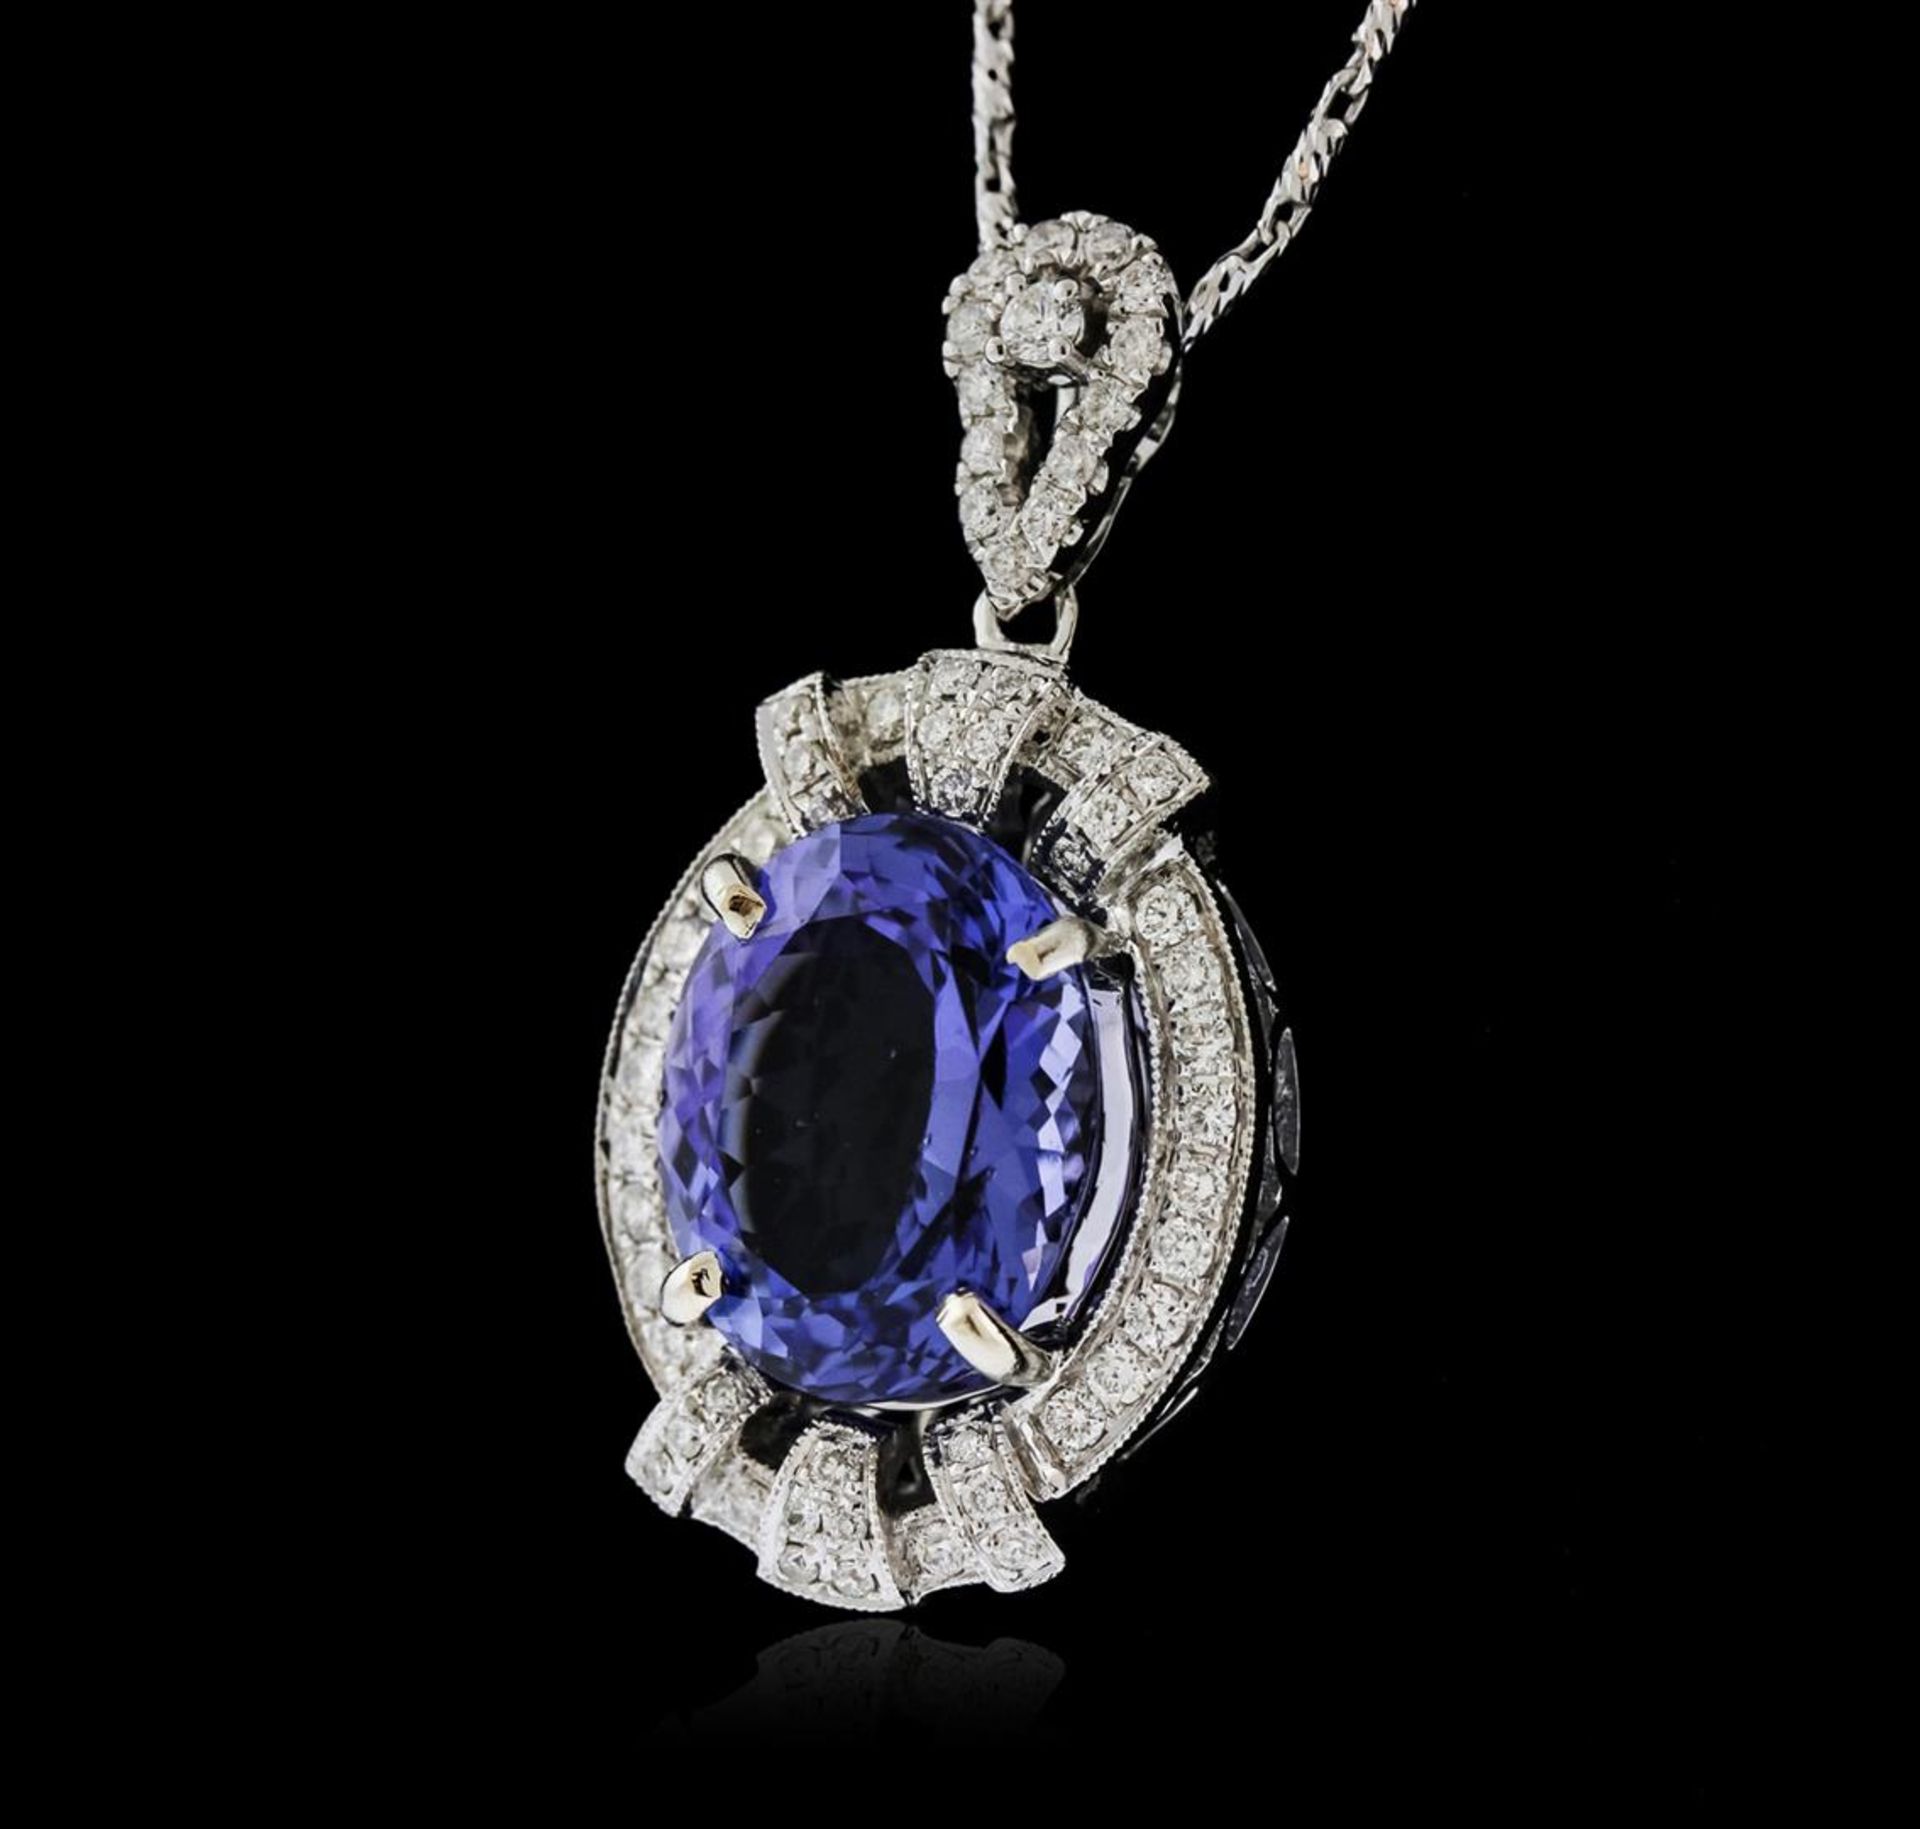 18KT White Gold 6.20 ctw Tanzanite and Diamond Pendant With Chain - Image 3 of 4